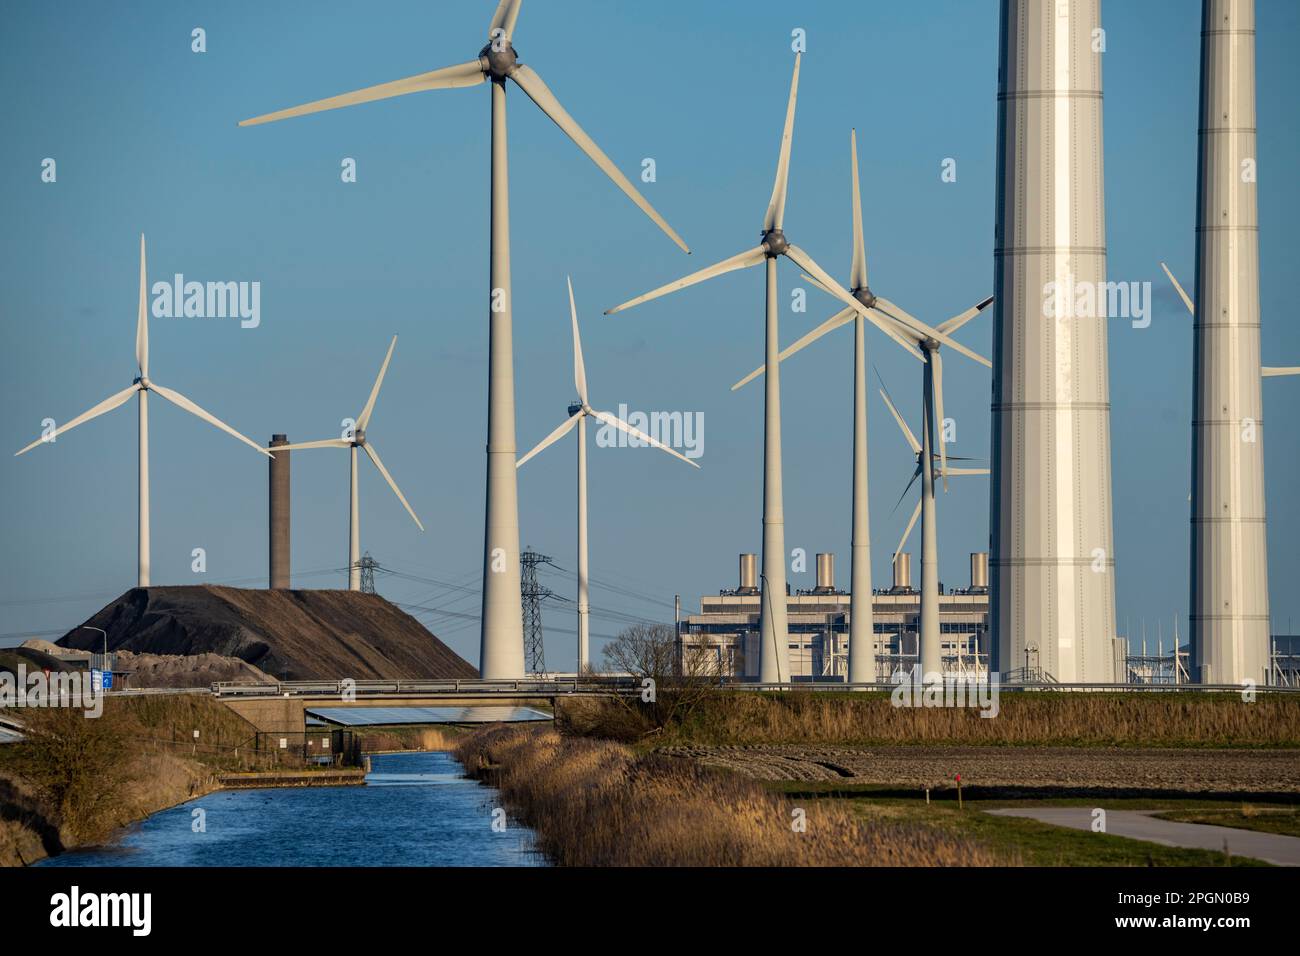 Eemshaven, wind farm, behind the Eemscentrale gas and steam power plant, Groningen, Netherlands, Stock Photo